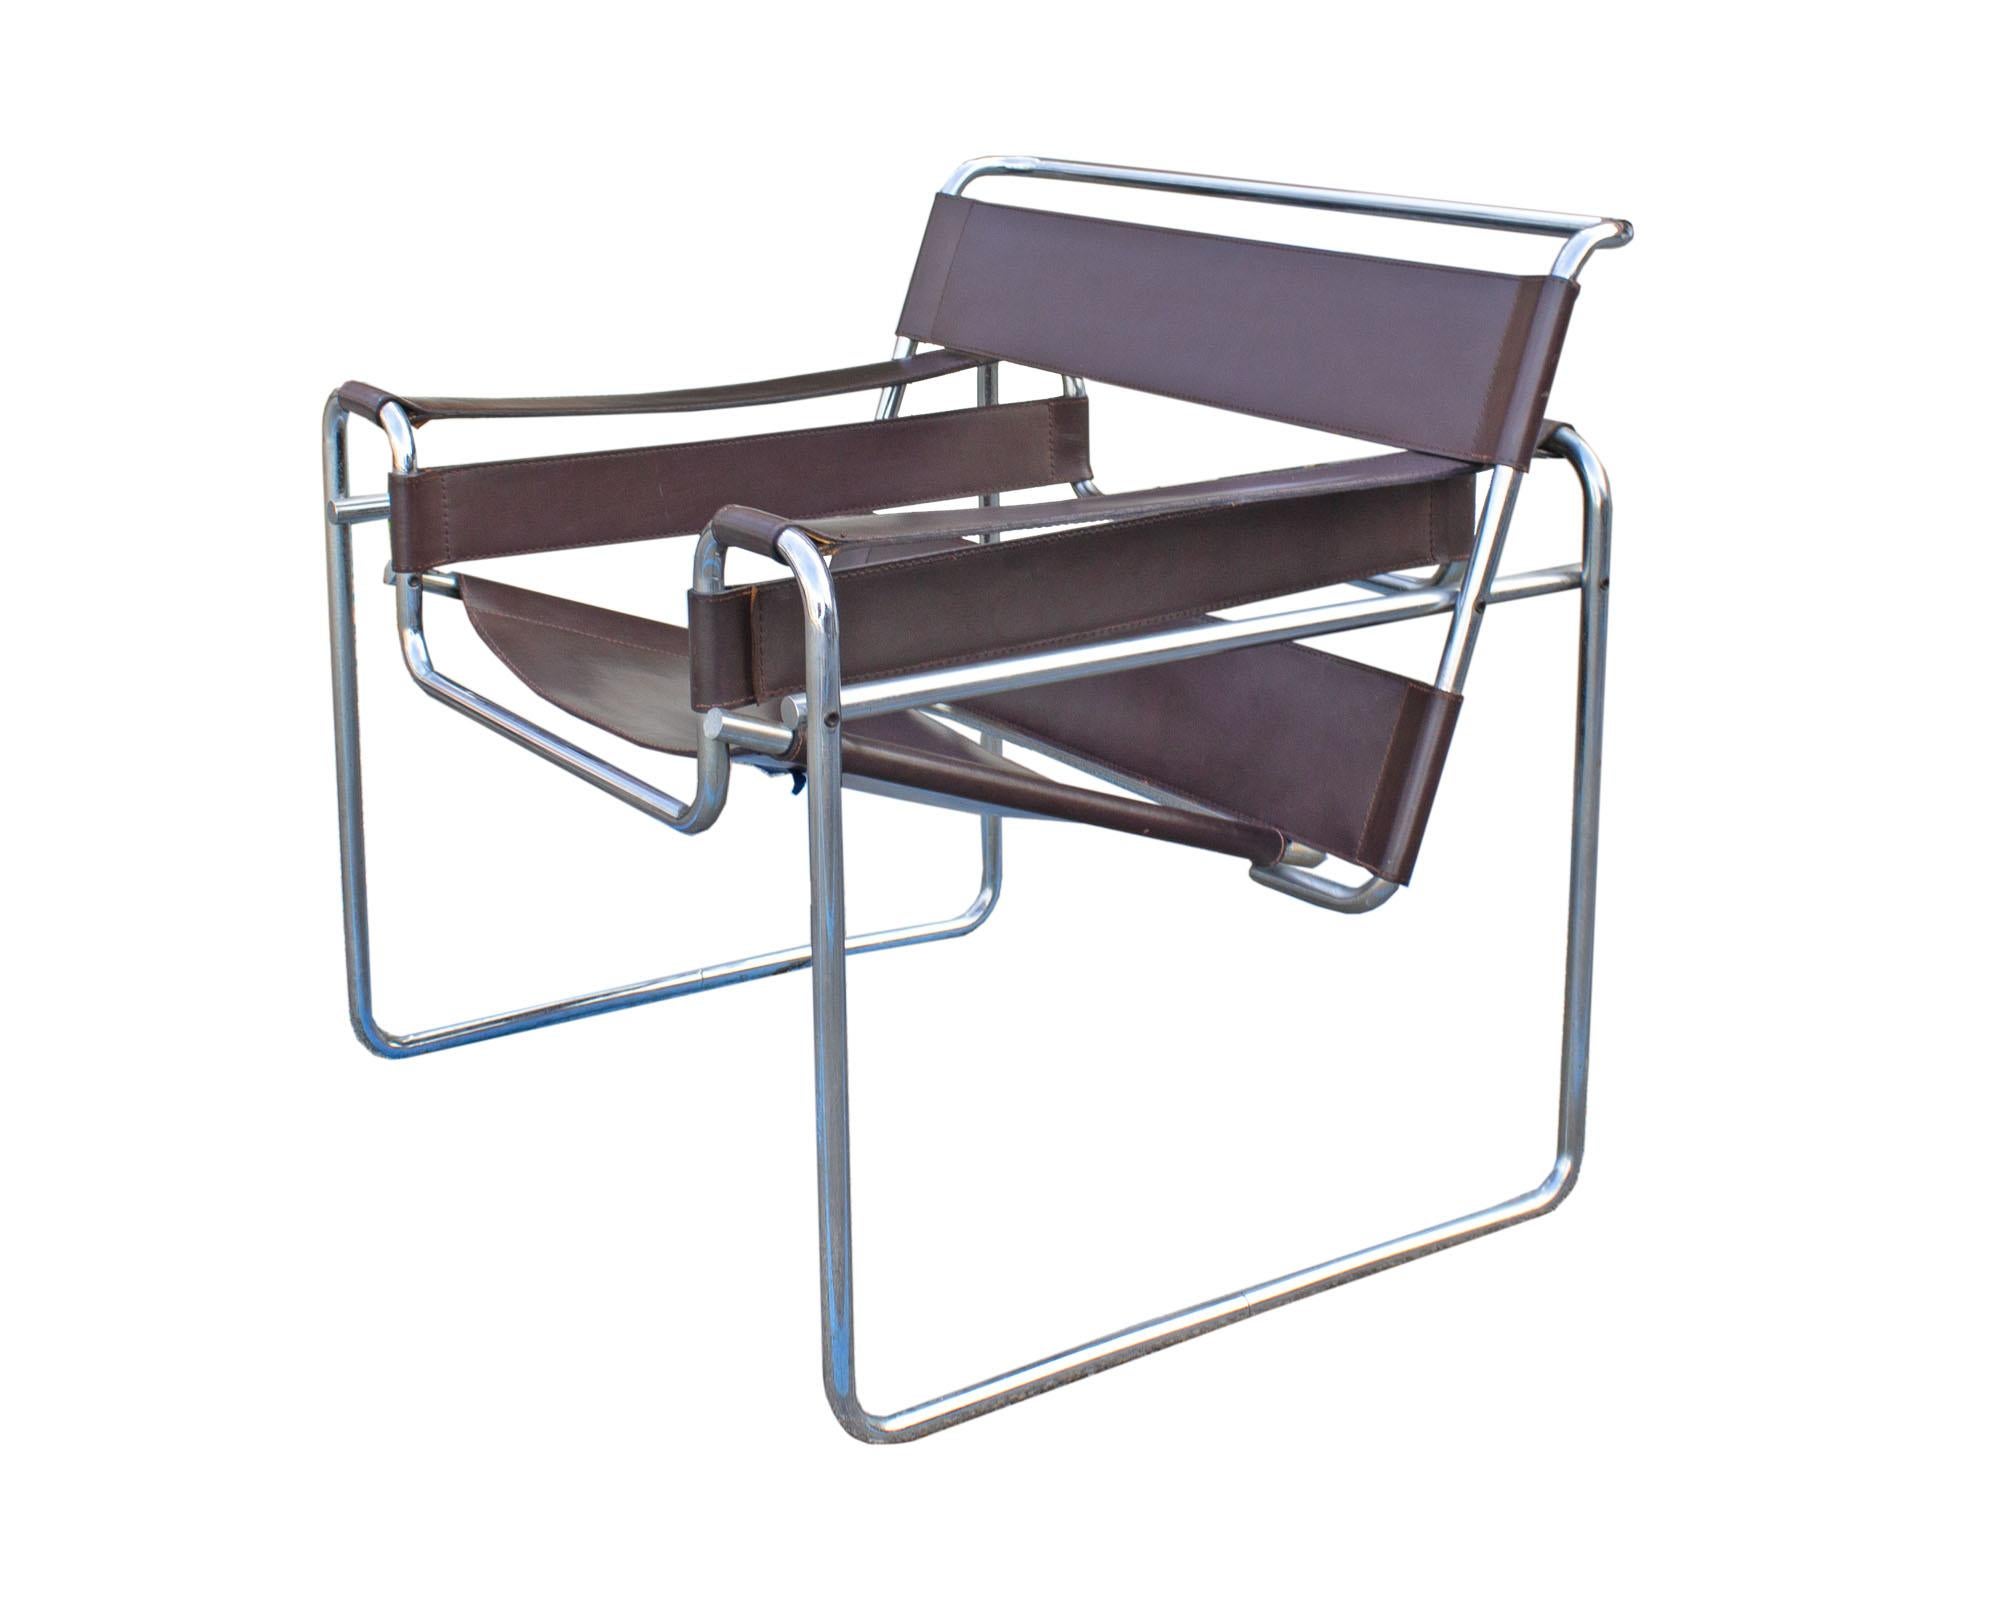 A vintage brown leather and chrome Wassily chair designed by Hungarian architect and furniture designer Marcel Breuer (1902-1981) for Knoll. Composed of a tubular chrome frame with brown leather straps positioned for comfortable seating, the Bauhaus